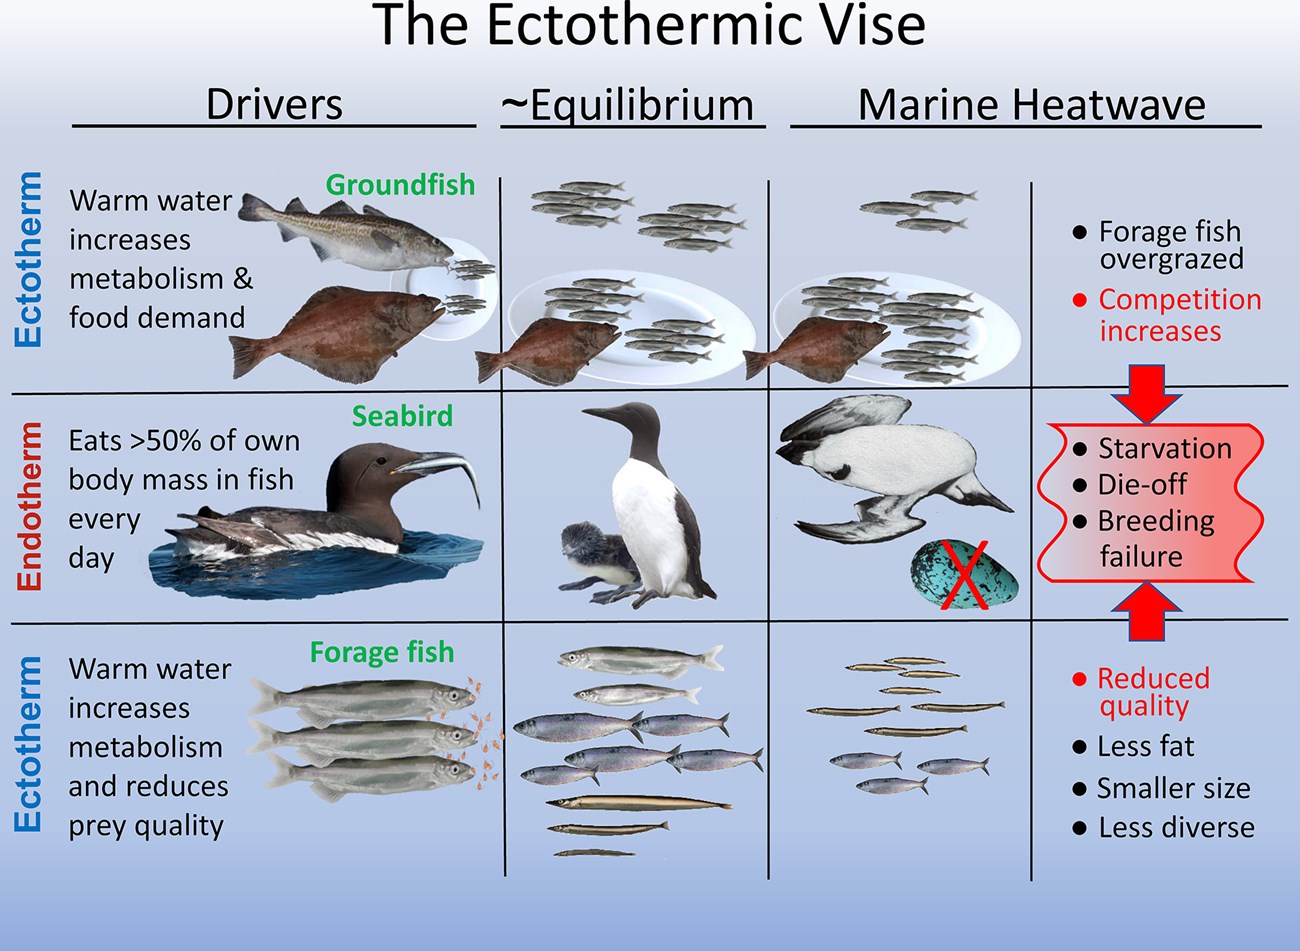 Illustration of the “ectothermic vise” hypothesis.